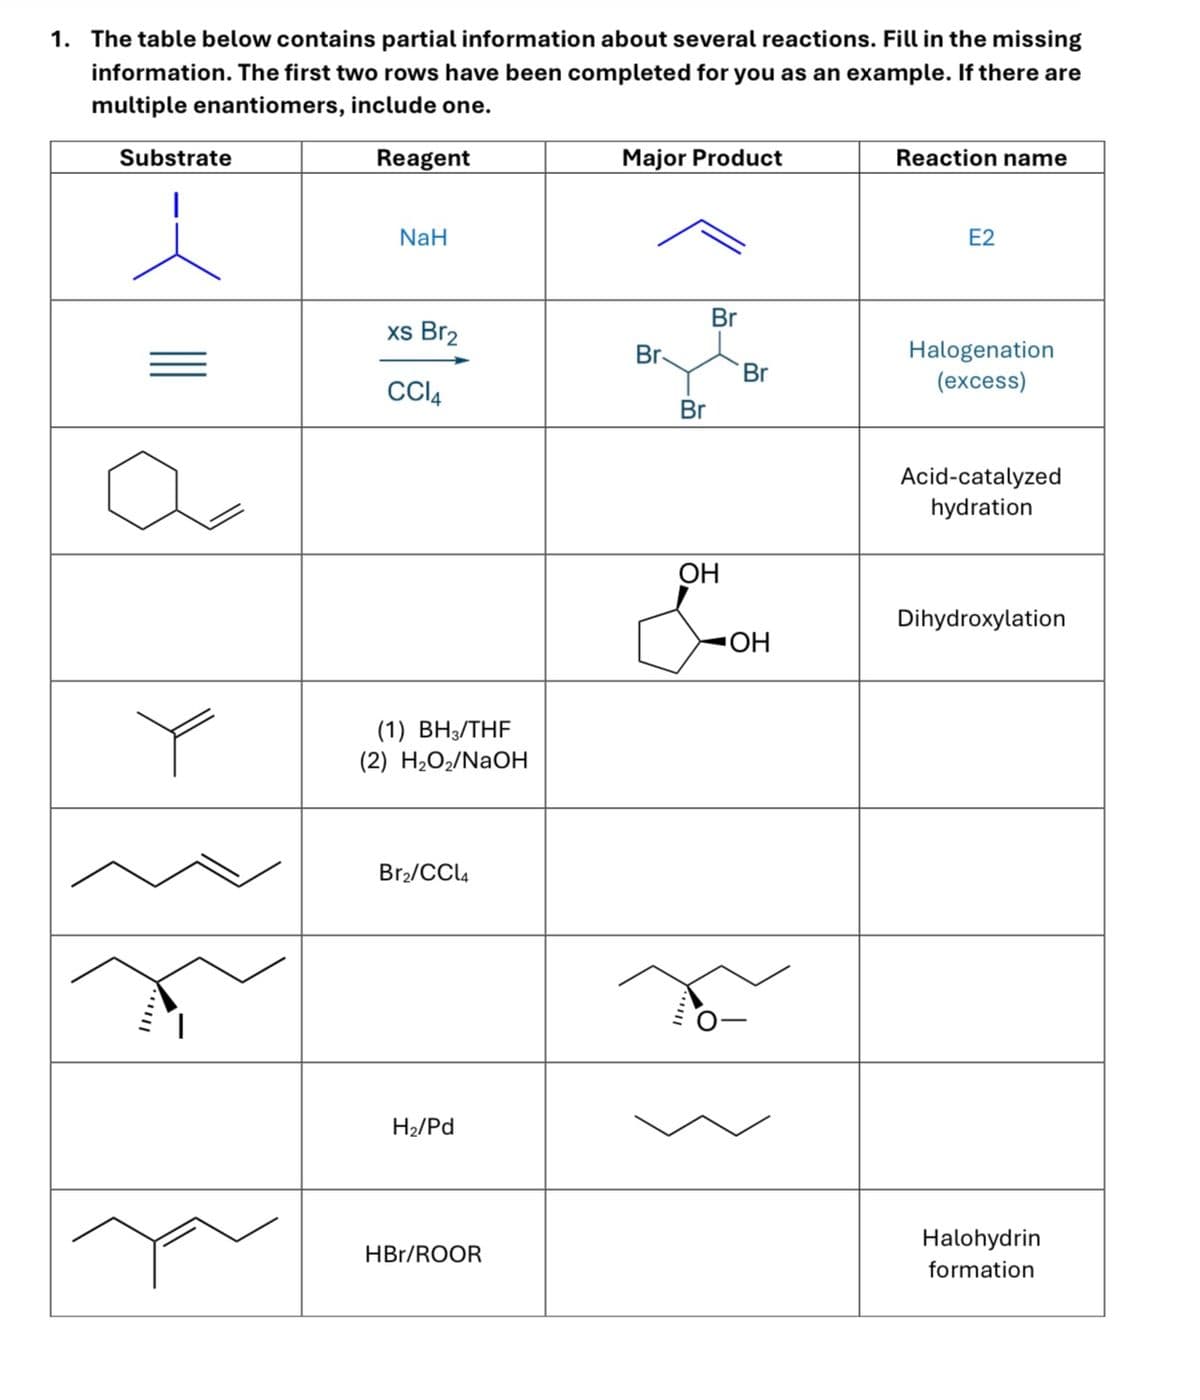 1. The table below contains partial information about several reactions. Fill in the missing
information. The first two rows have been completed for you as an example. If there are
multiple enantiomers, include one.
Substrate
Reagent
NaH
Major Product
Br
xs Br2
Br
==
Br
CC14
Br
וווייי
(1) BH3/THF
(2) H2O2/NaOH
Br₂/CCl4
H2/Pd
HBr/ROOR
Reaction name
E2
Halogenation
(excess)
Acid-catalyzed
hydration
OH
Dihydroxylation
▪OH
Halohydrin
formation